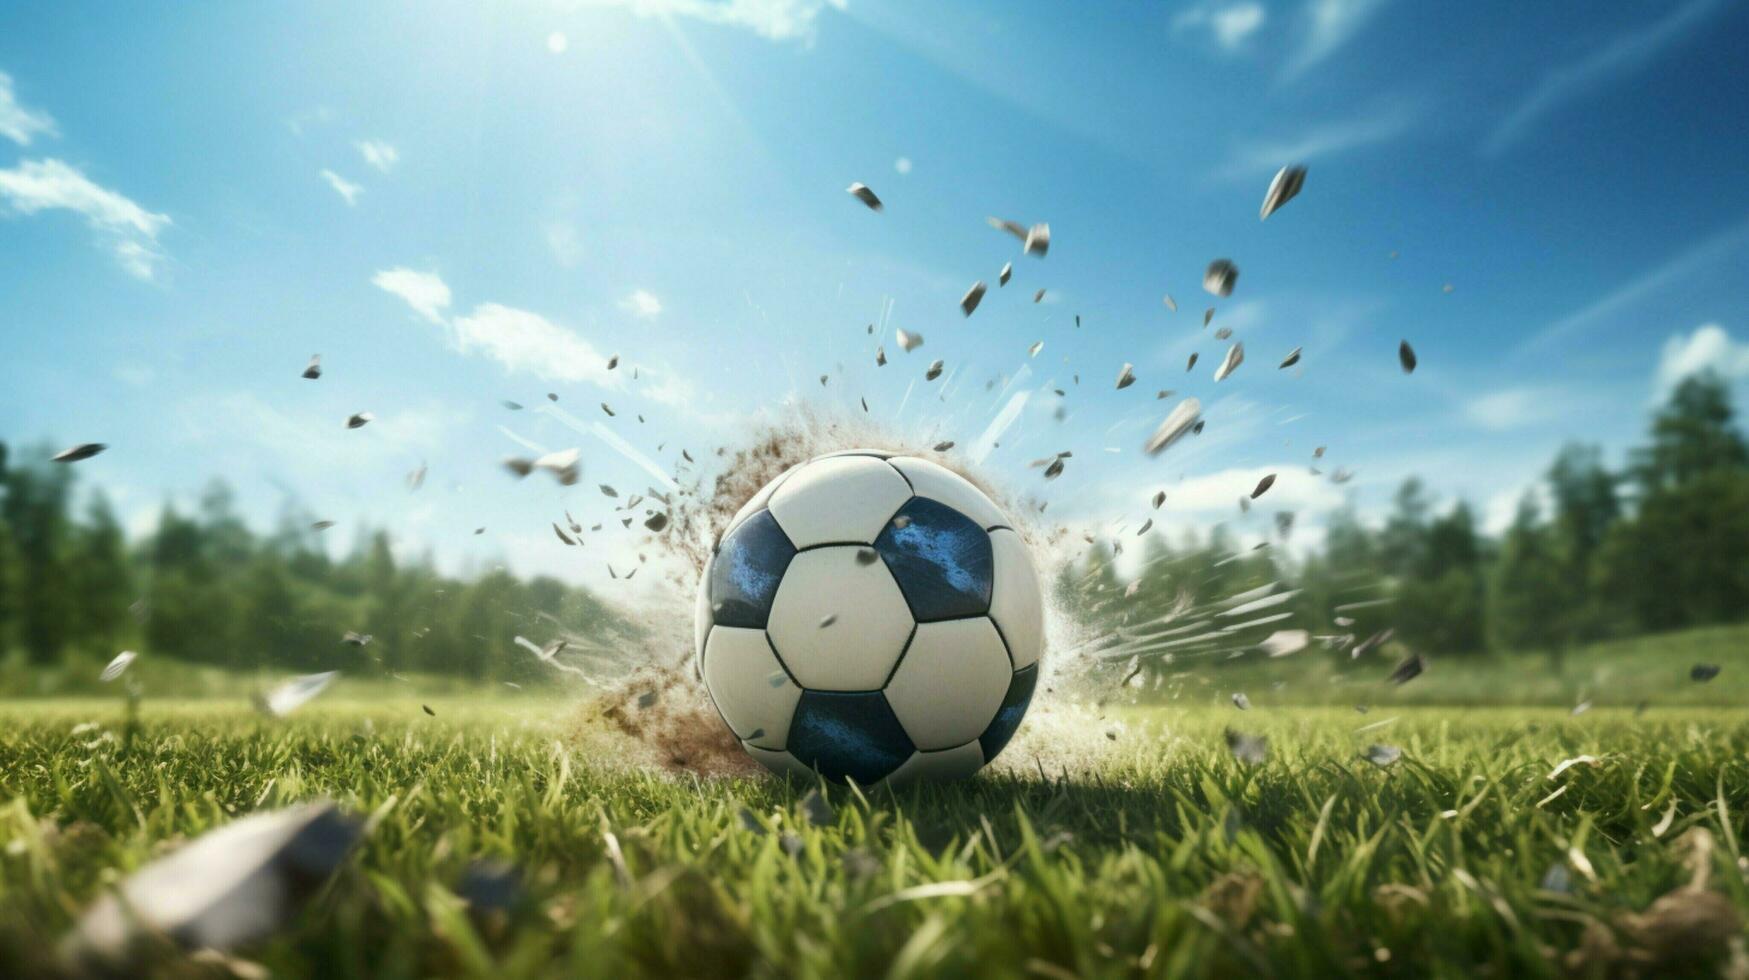 a soccer ball kicked in the bright daylight photo